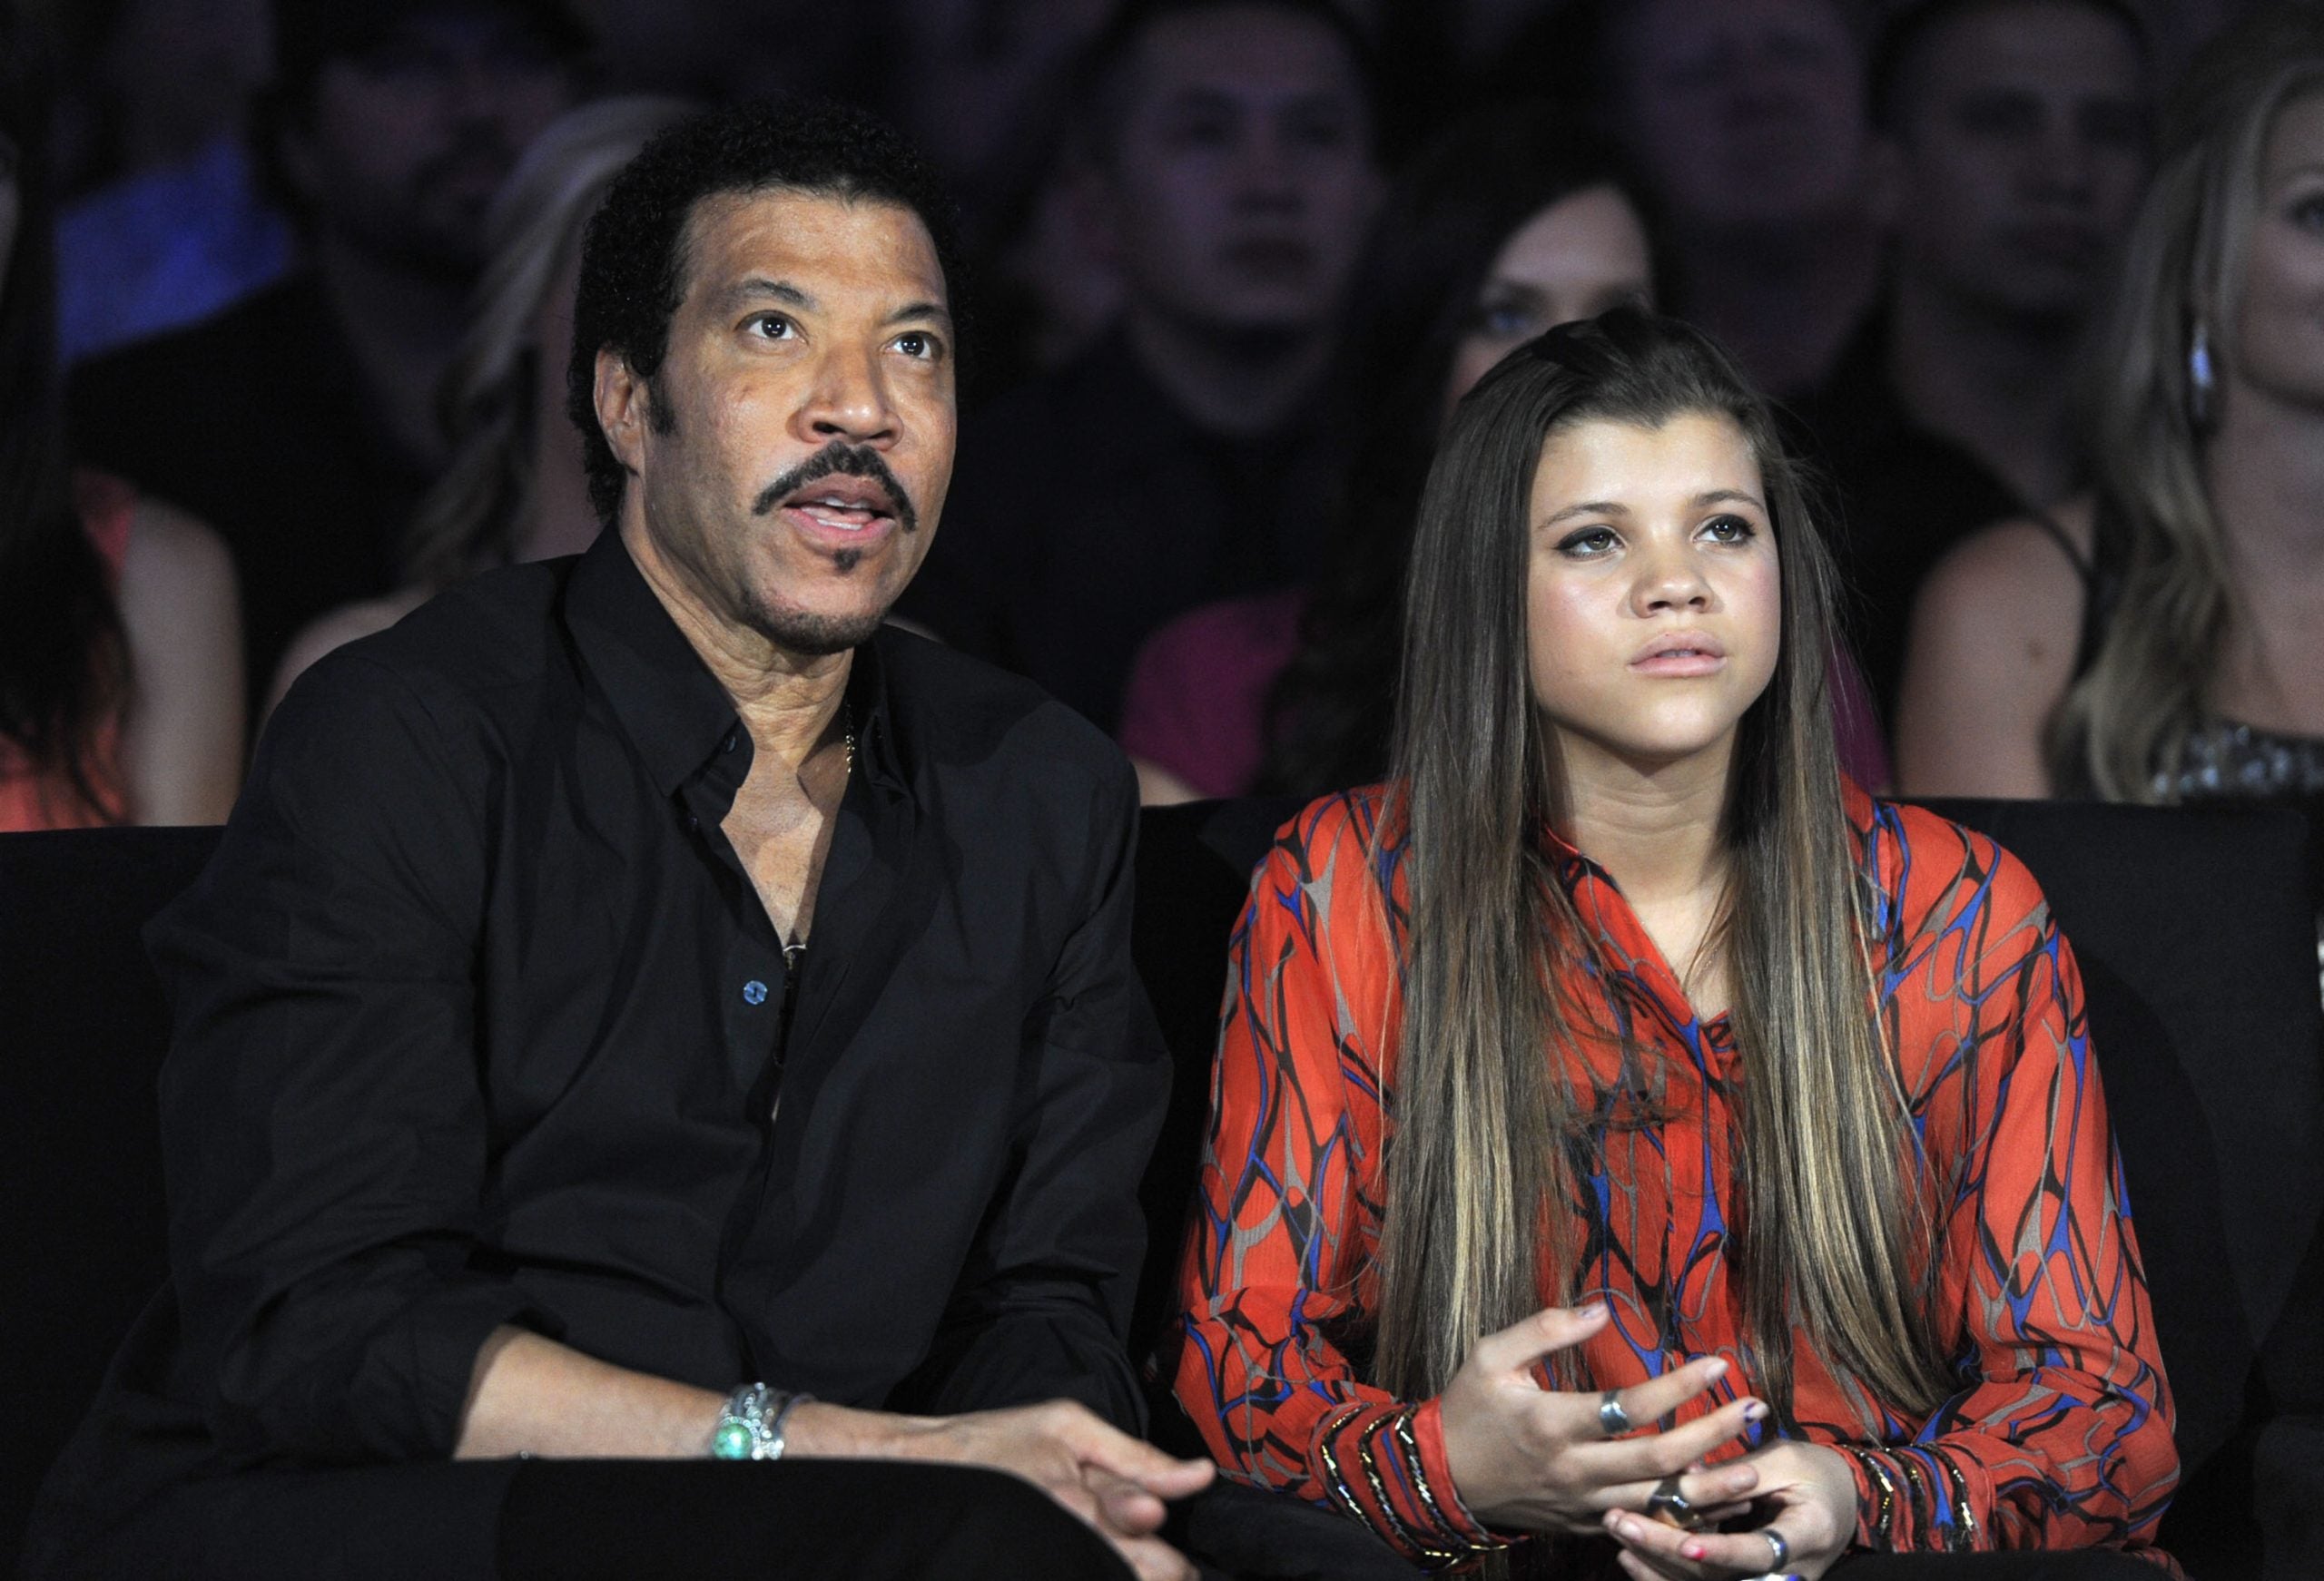 Lionel Richie's Daughter Sofia Is Engaged: 11 Photos Of Father And Daughter From Over The Years